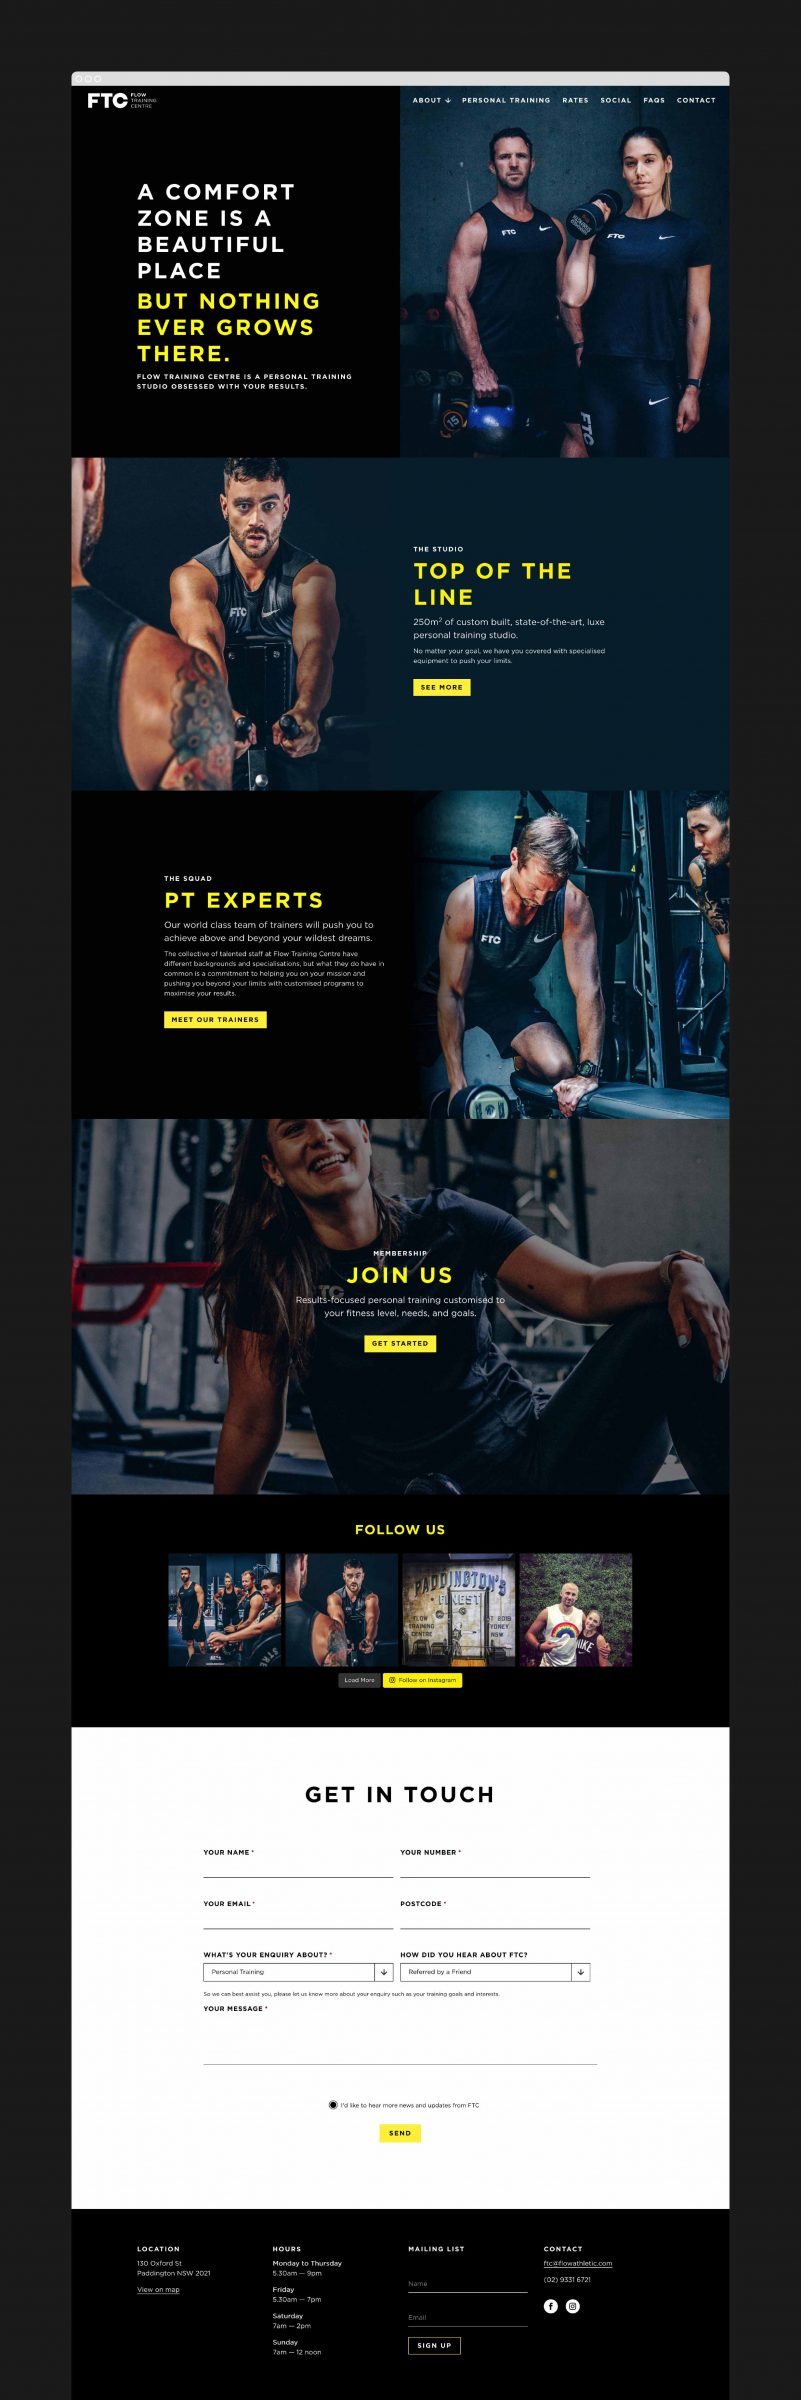 Gym and Fitness. Branding, brand identity, logo design, web design and photography. Sydney, Surry Hills